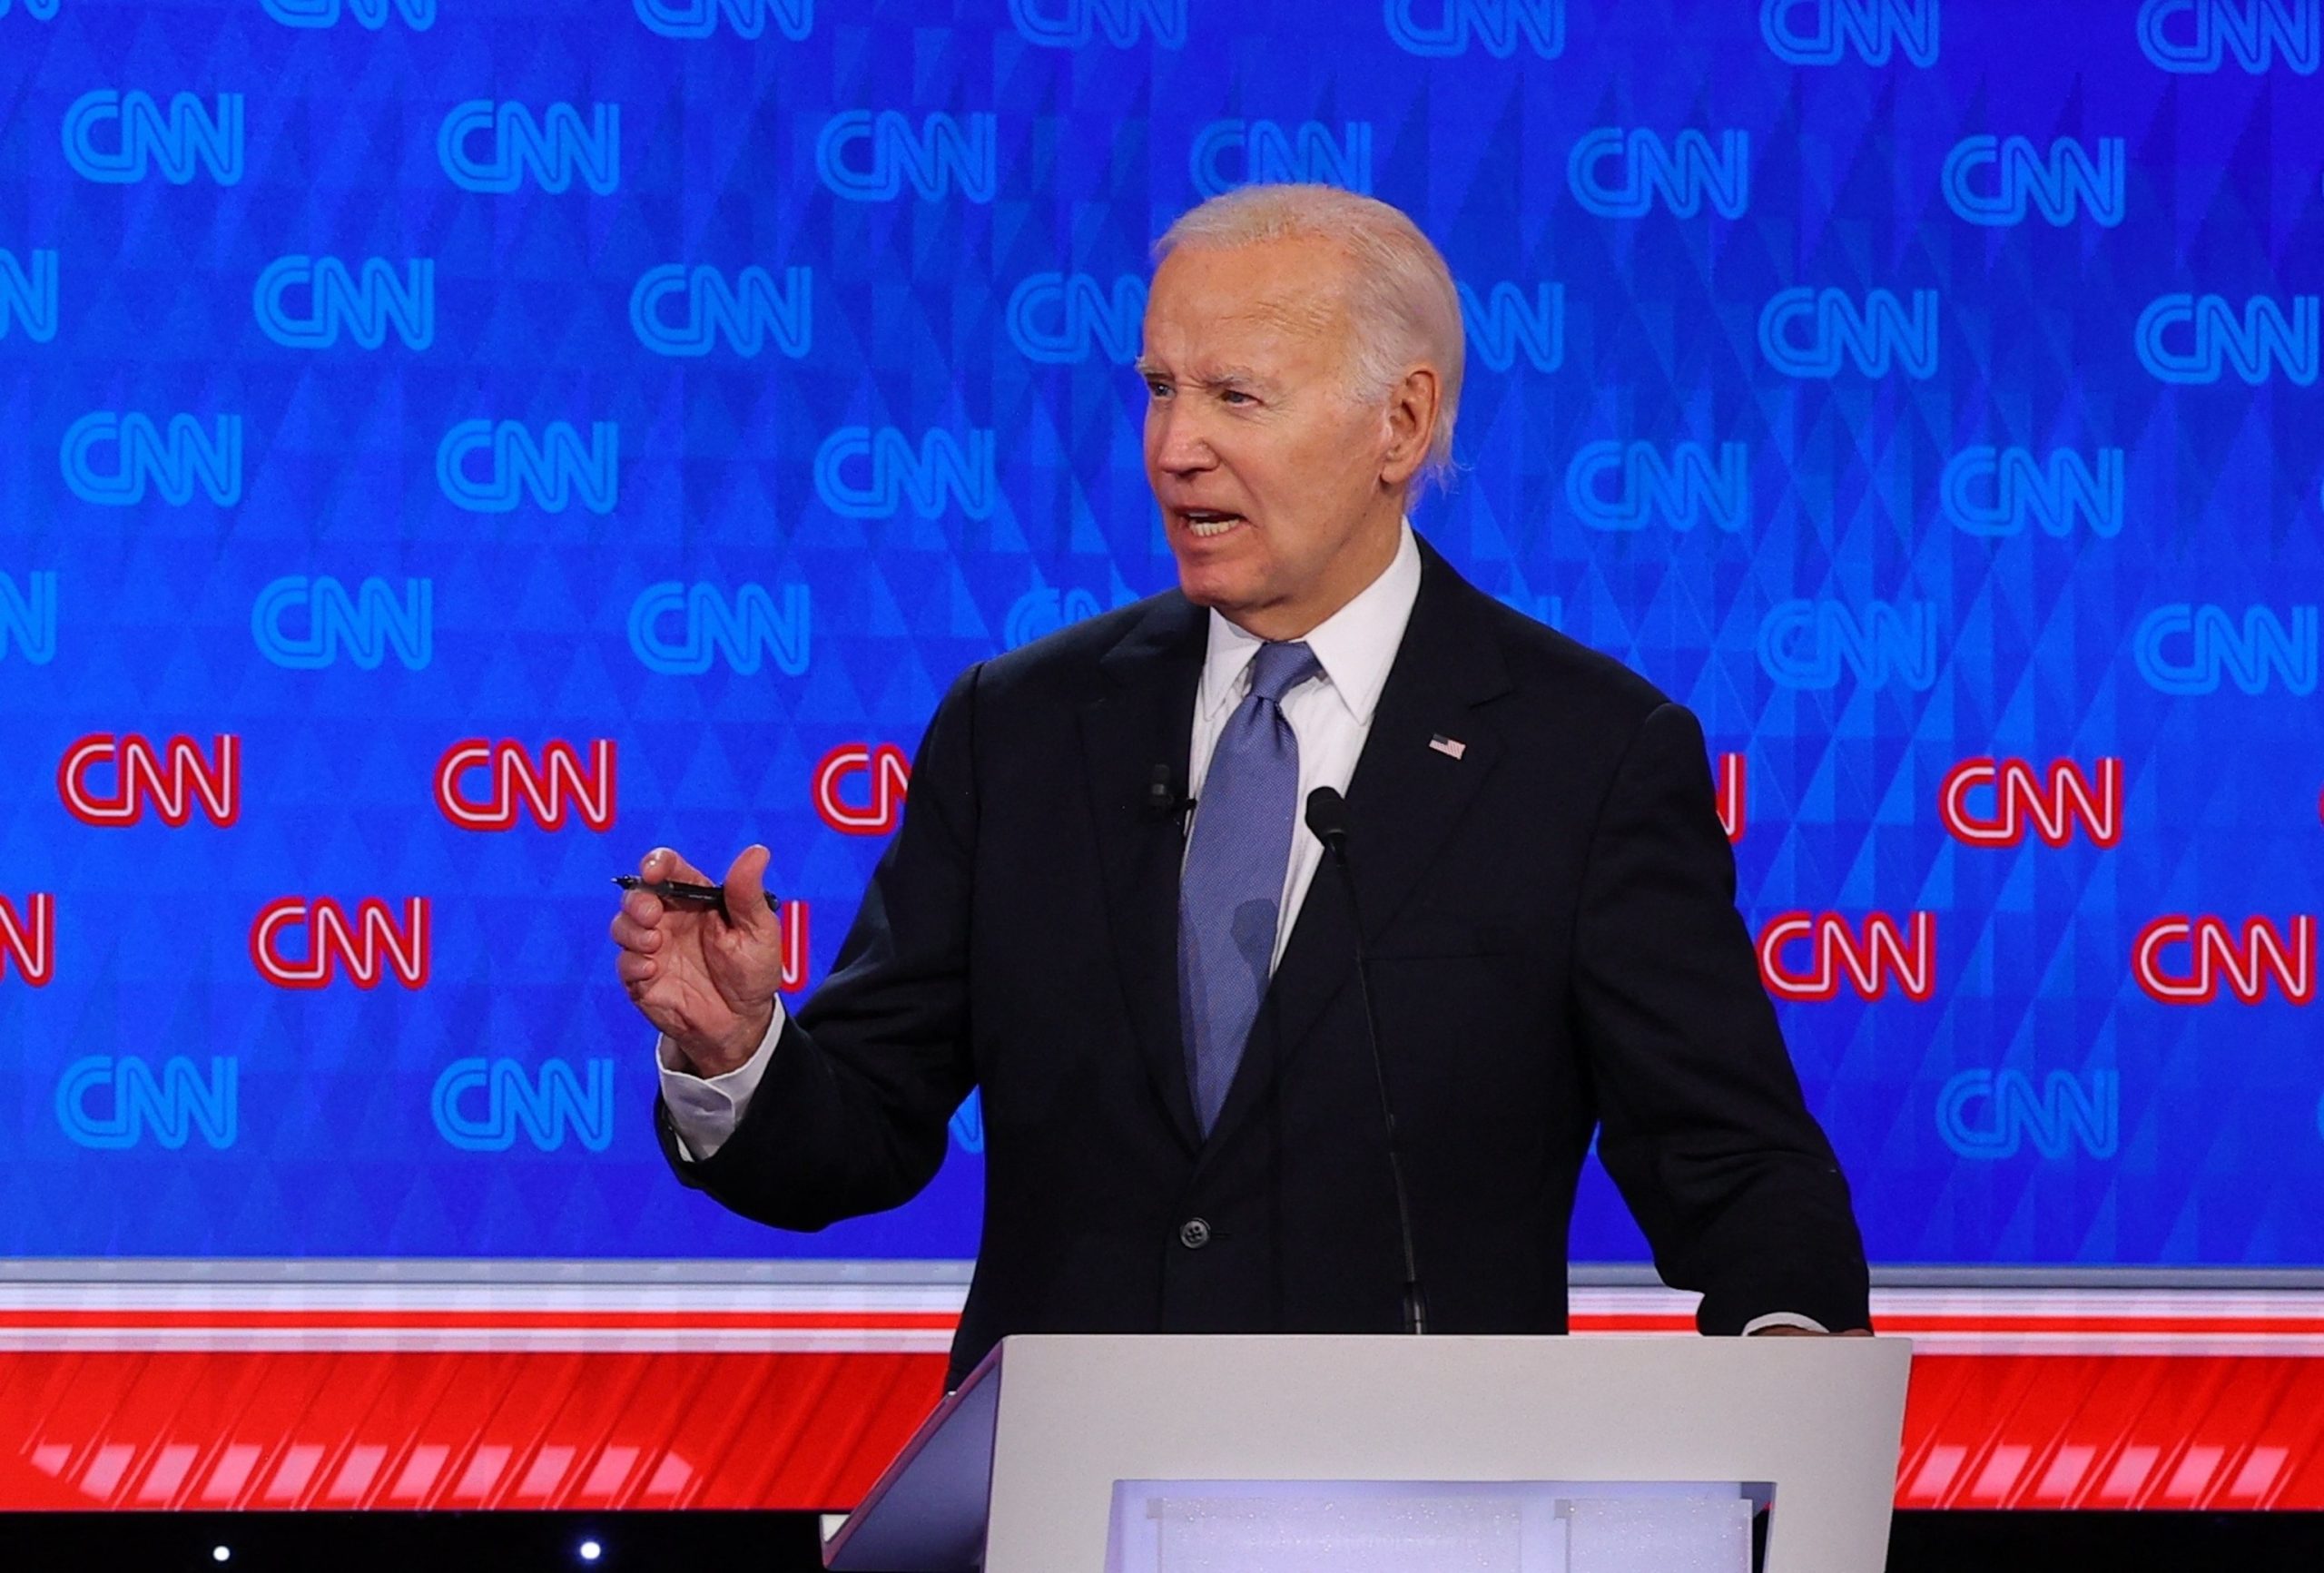 Democratic donors are divided as Biden campaign seeks to reassure supporters